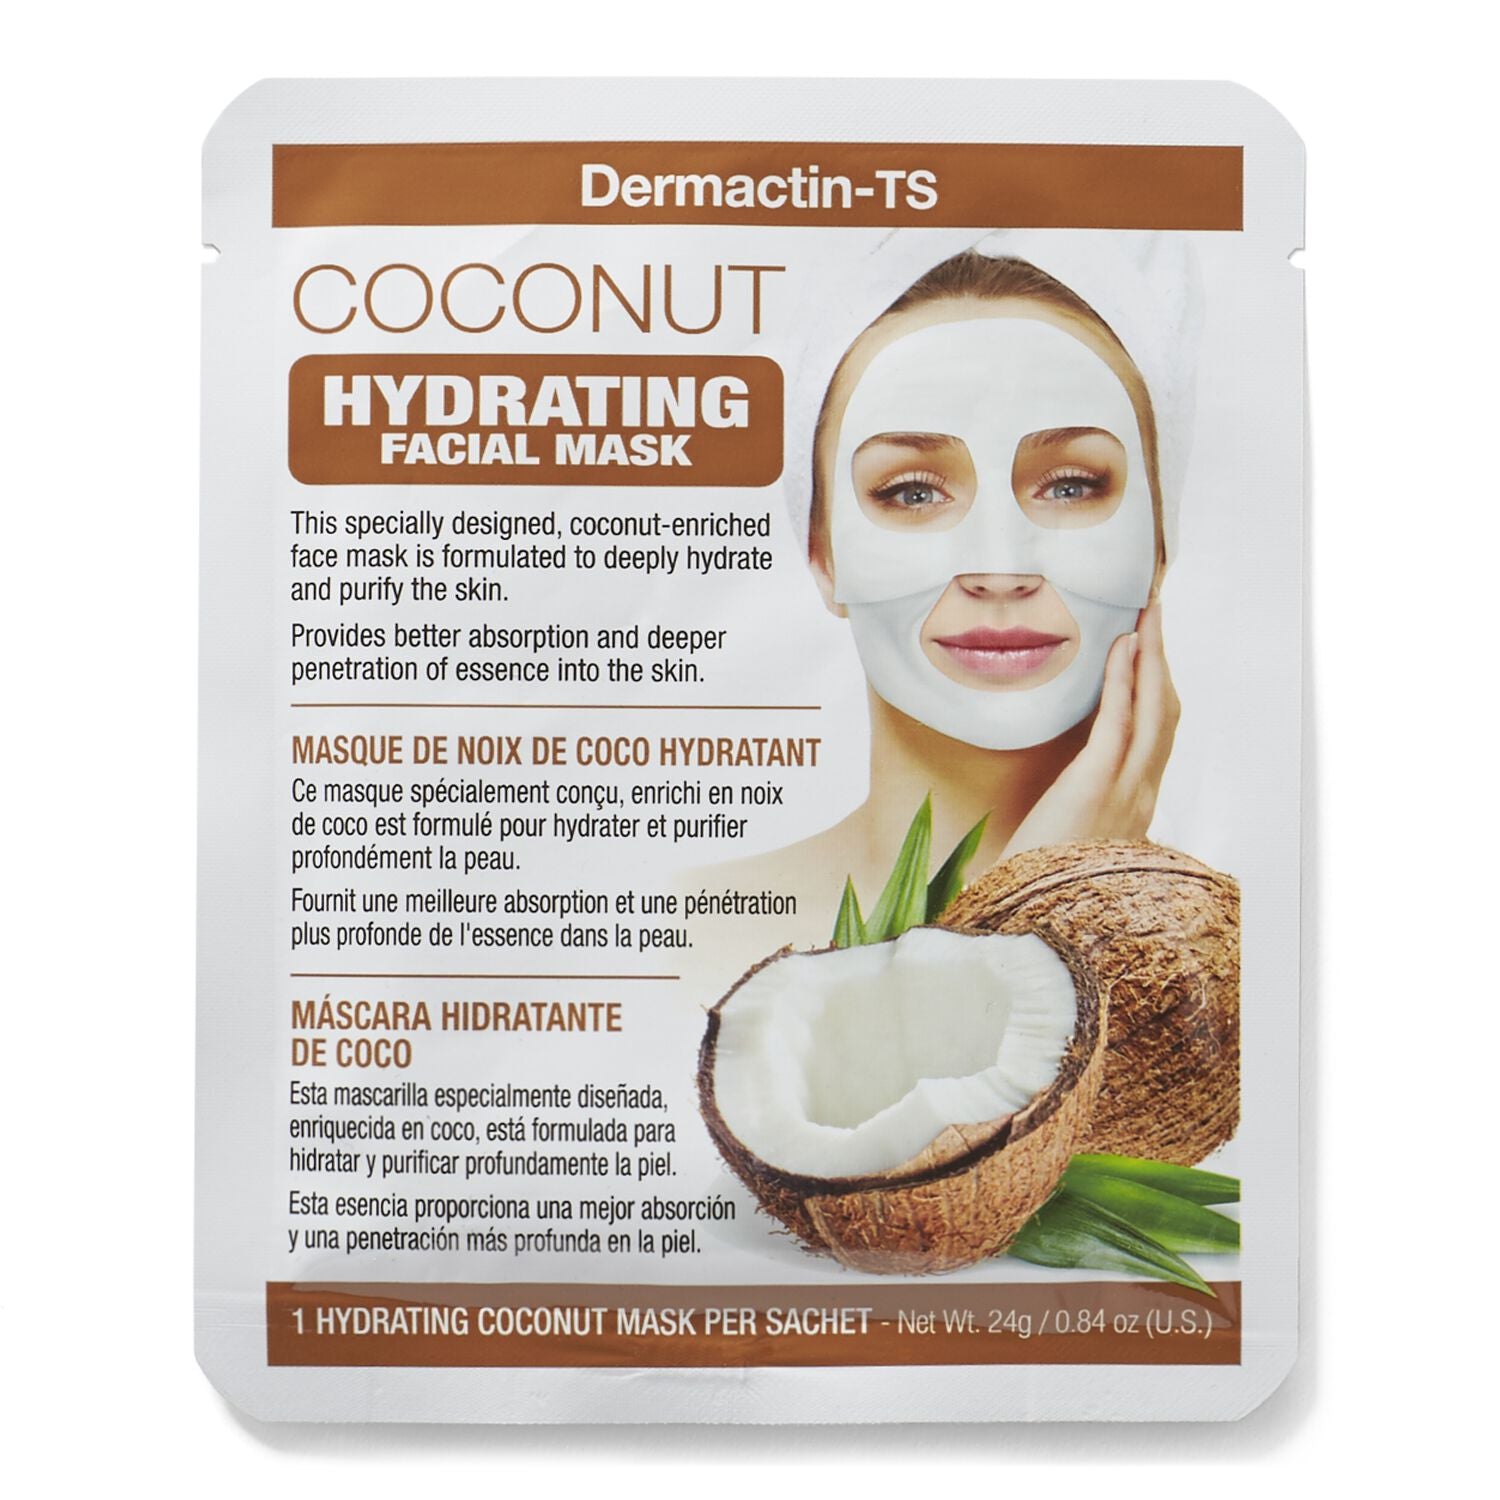 Dermactin-TS Coconut Hydrating Face Mask